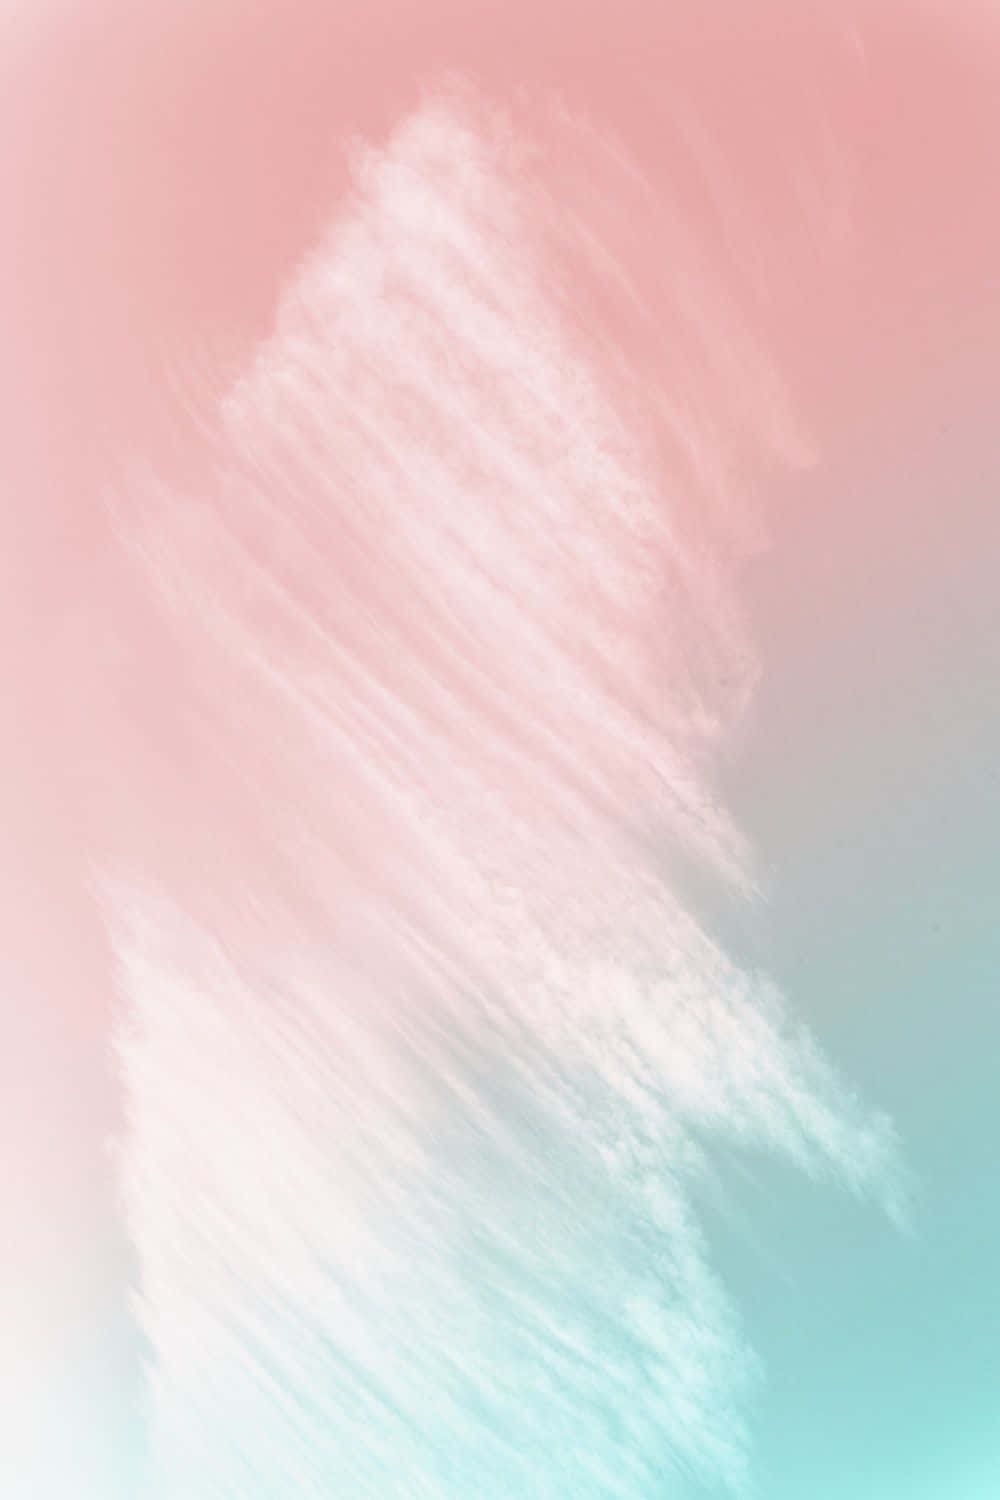 a pink and turquoise watercolor background